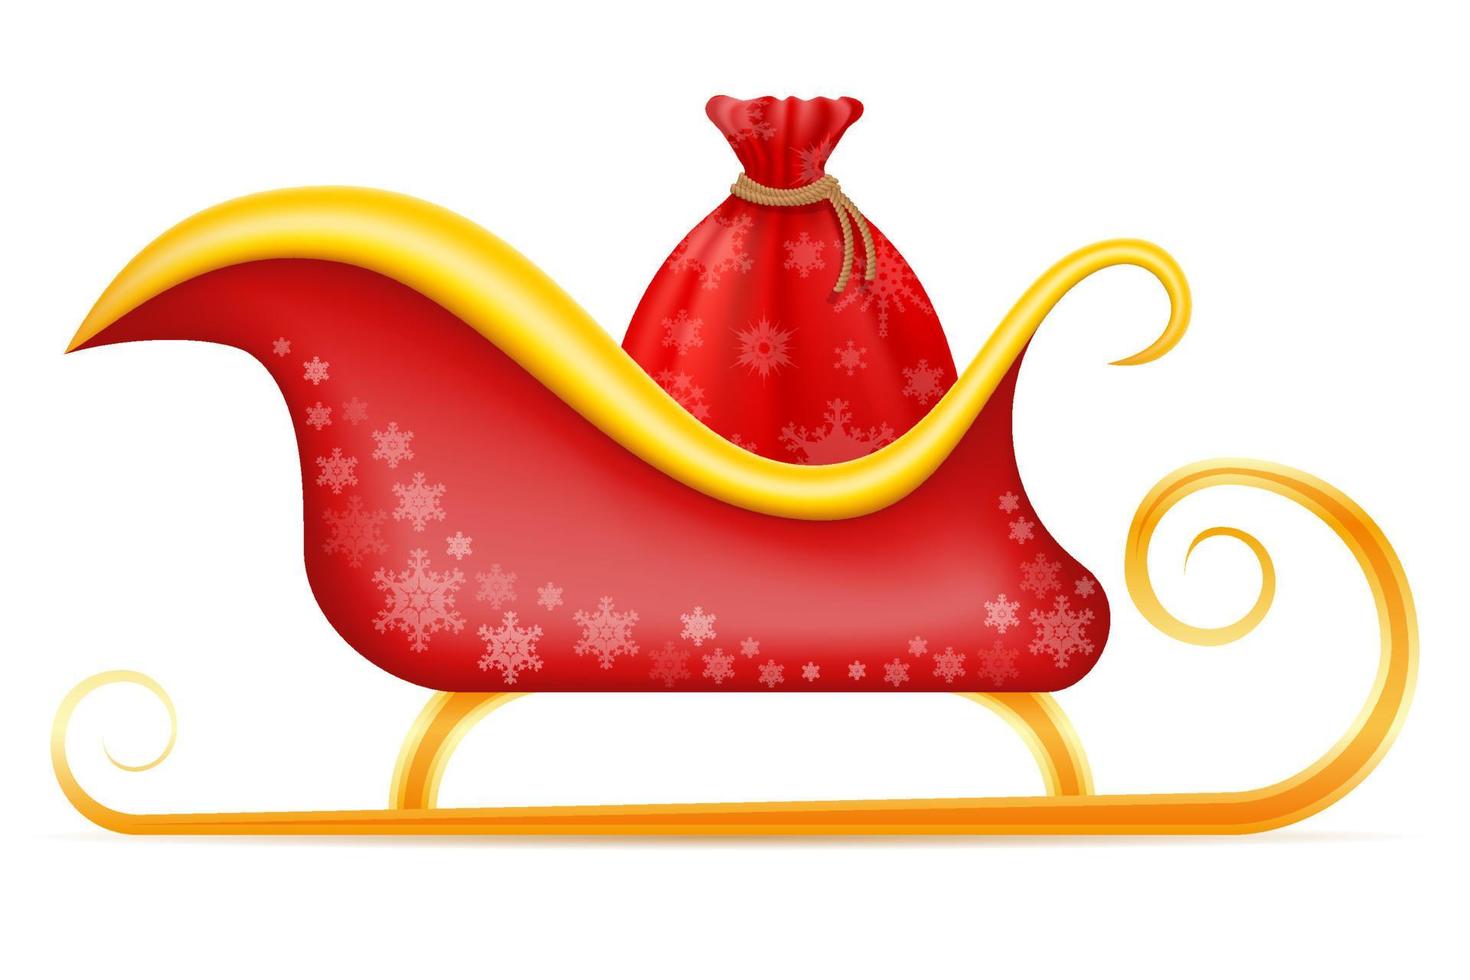 santa claus christmas sleigh vector illustration isolated on white background